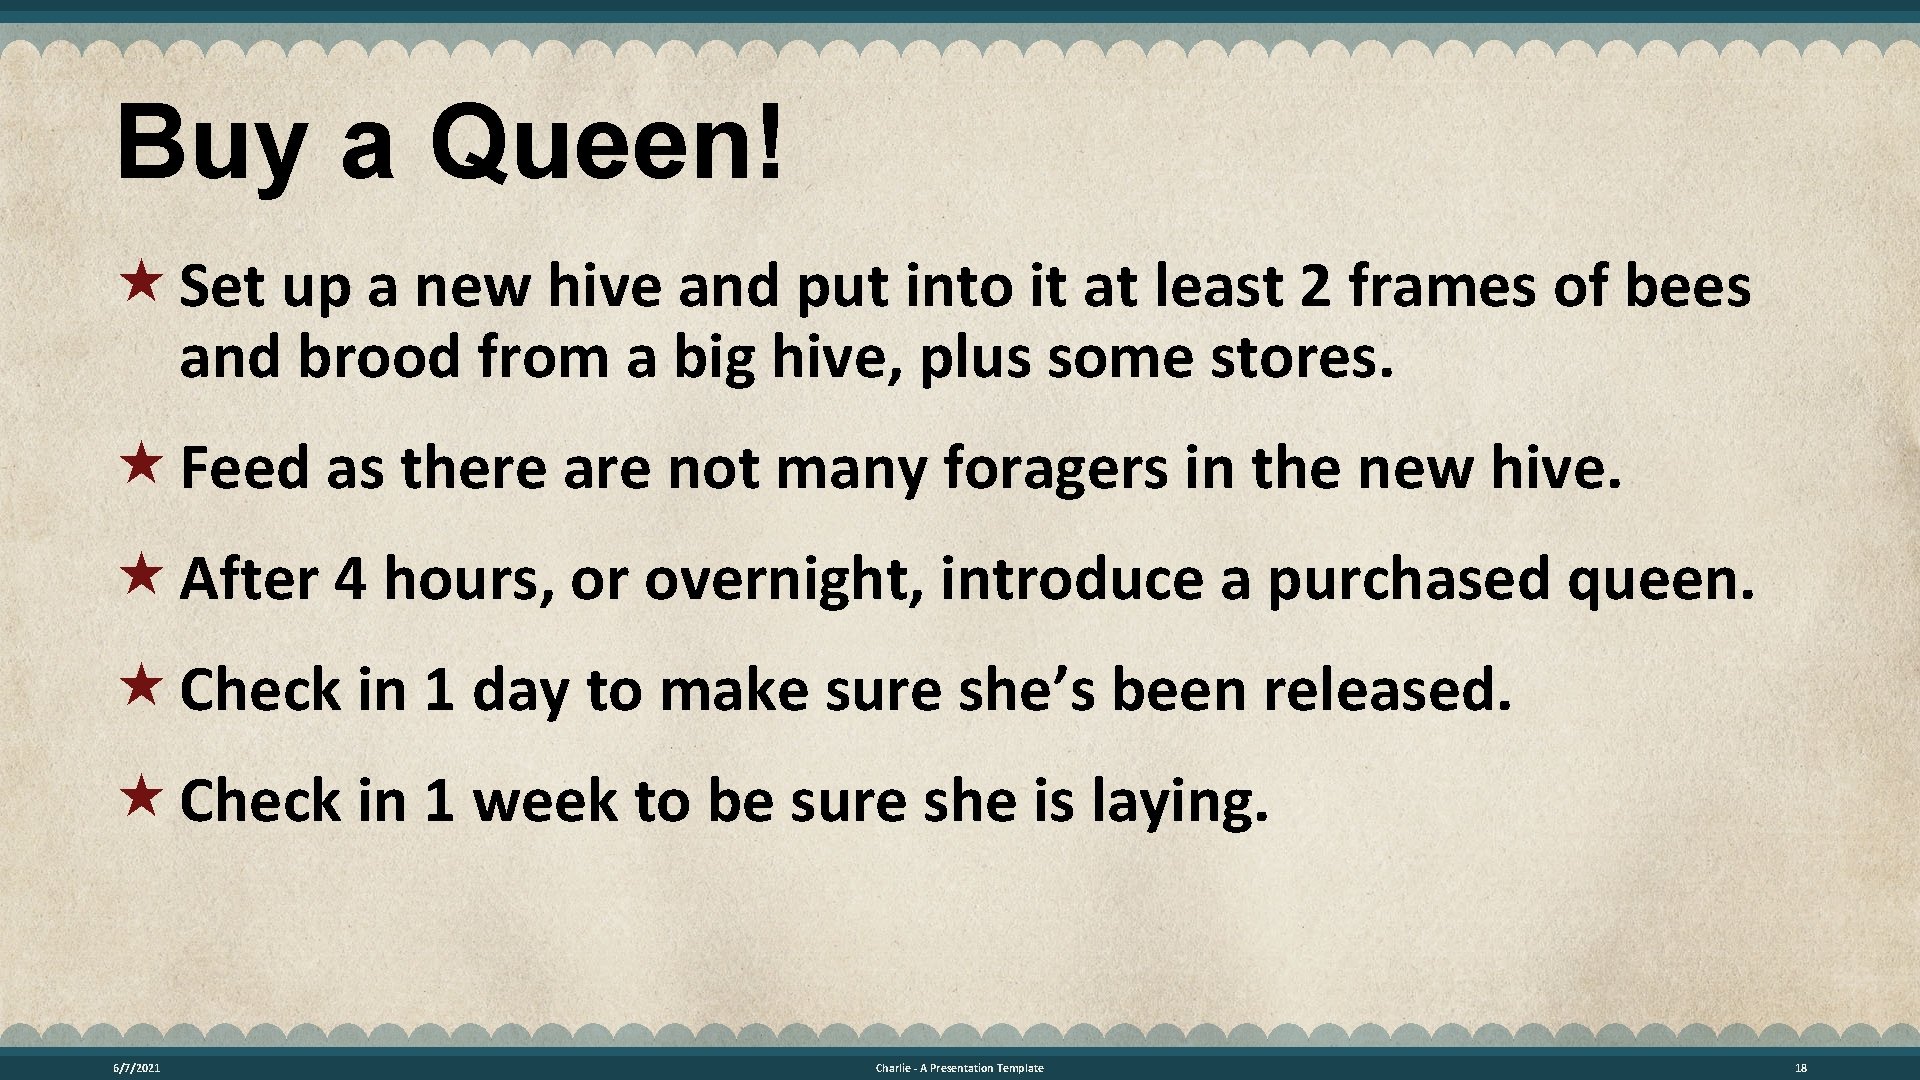 Buy a Queen! Set up a new hive and put into it at least